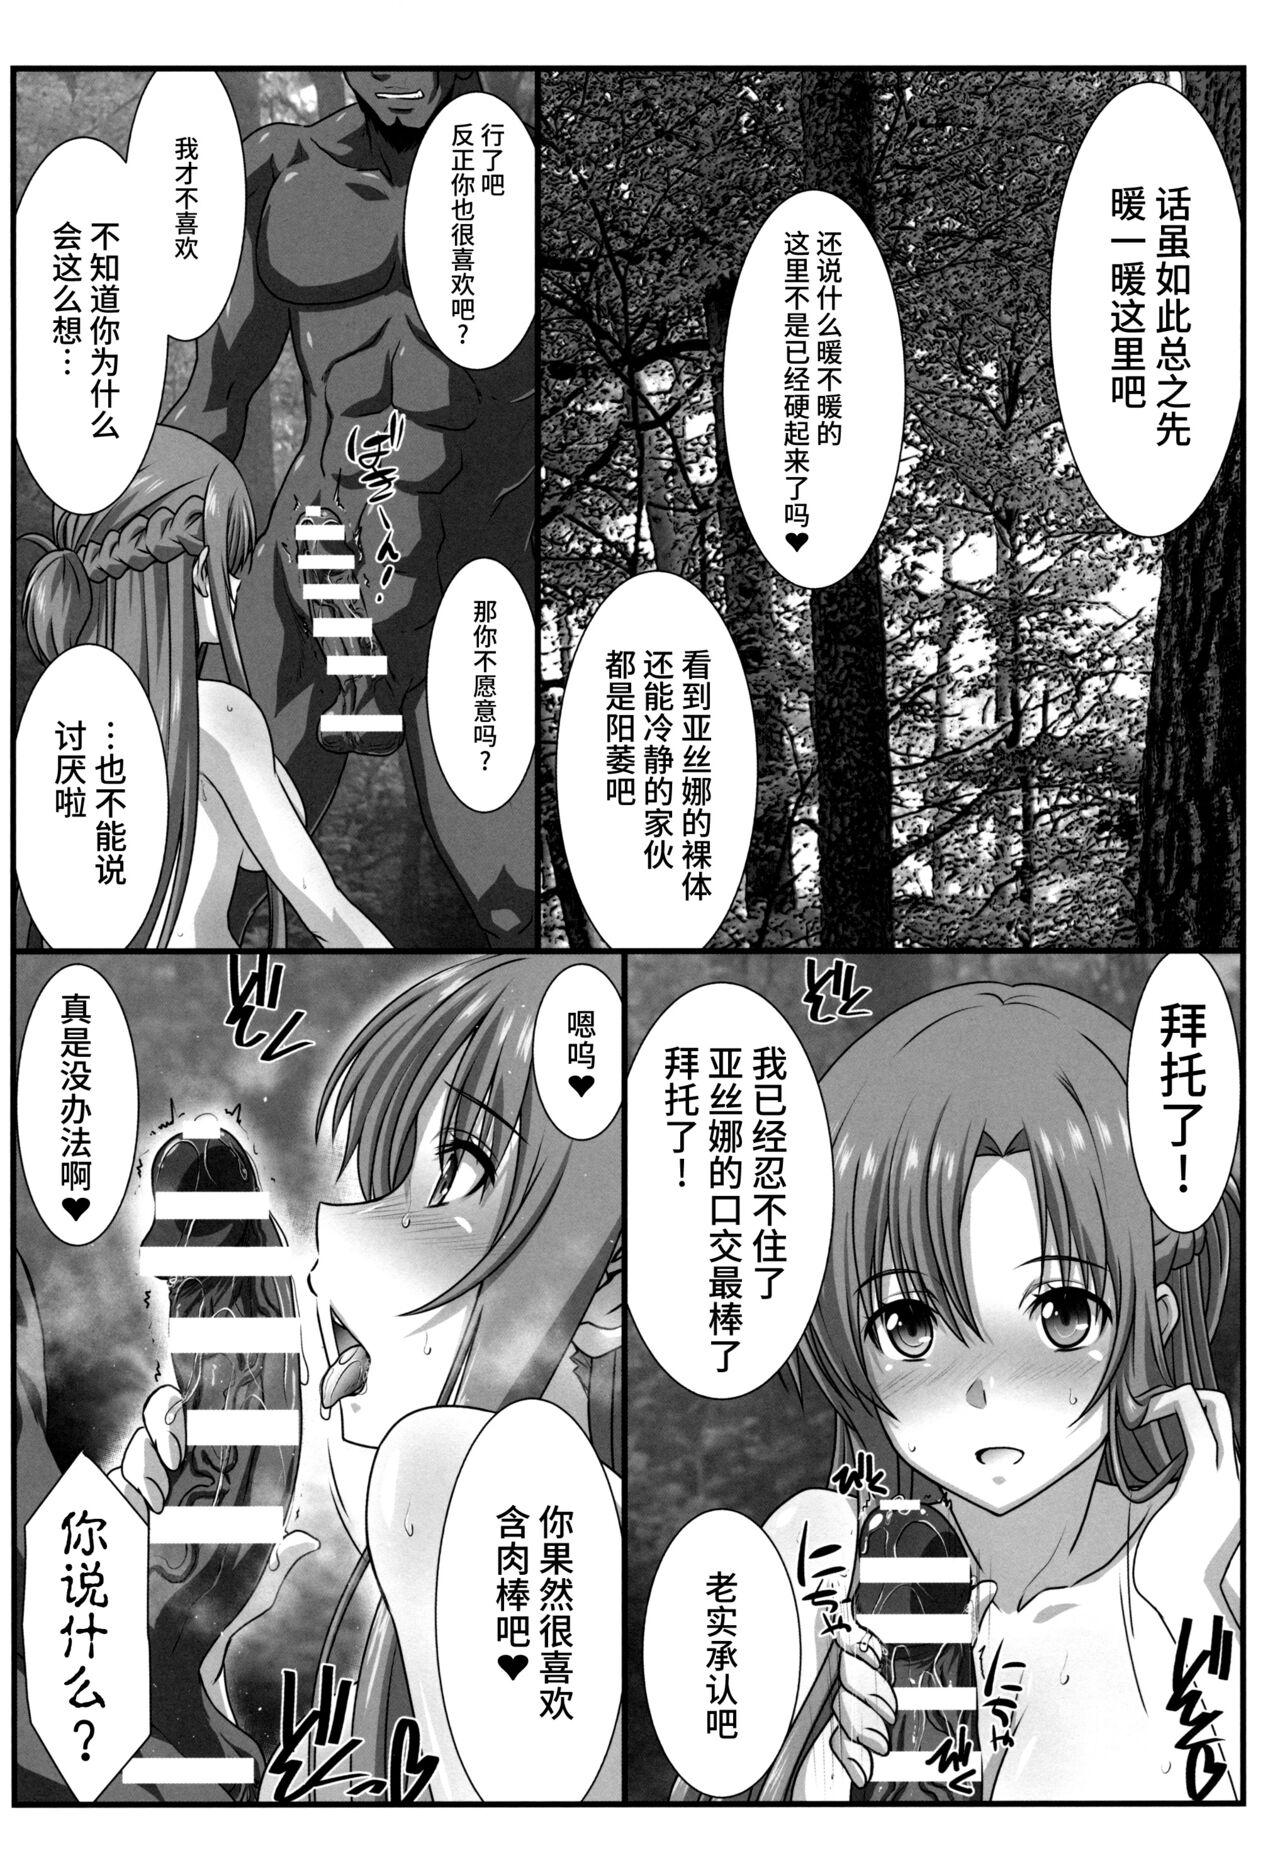 Pussy Play Astral Bout Ver. 45 - Sword art online Amazing - Page 5